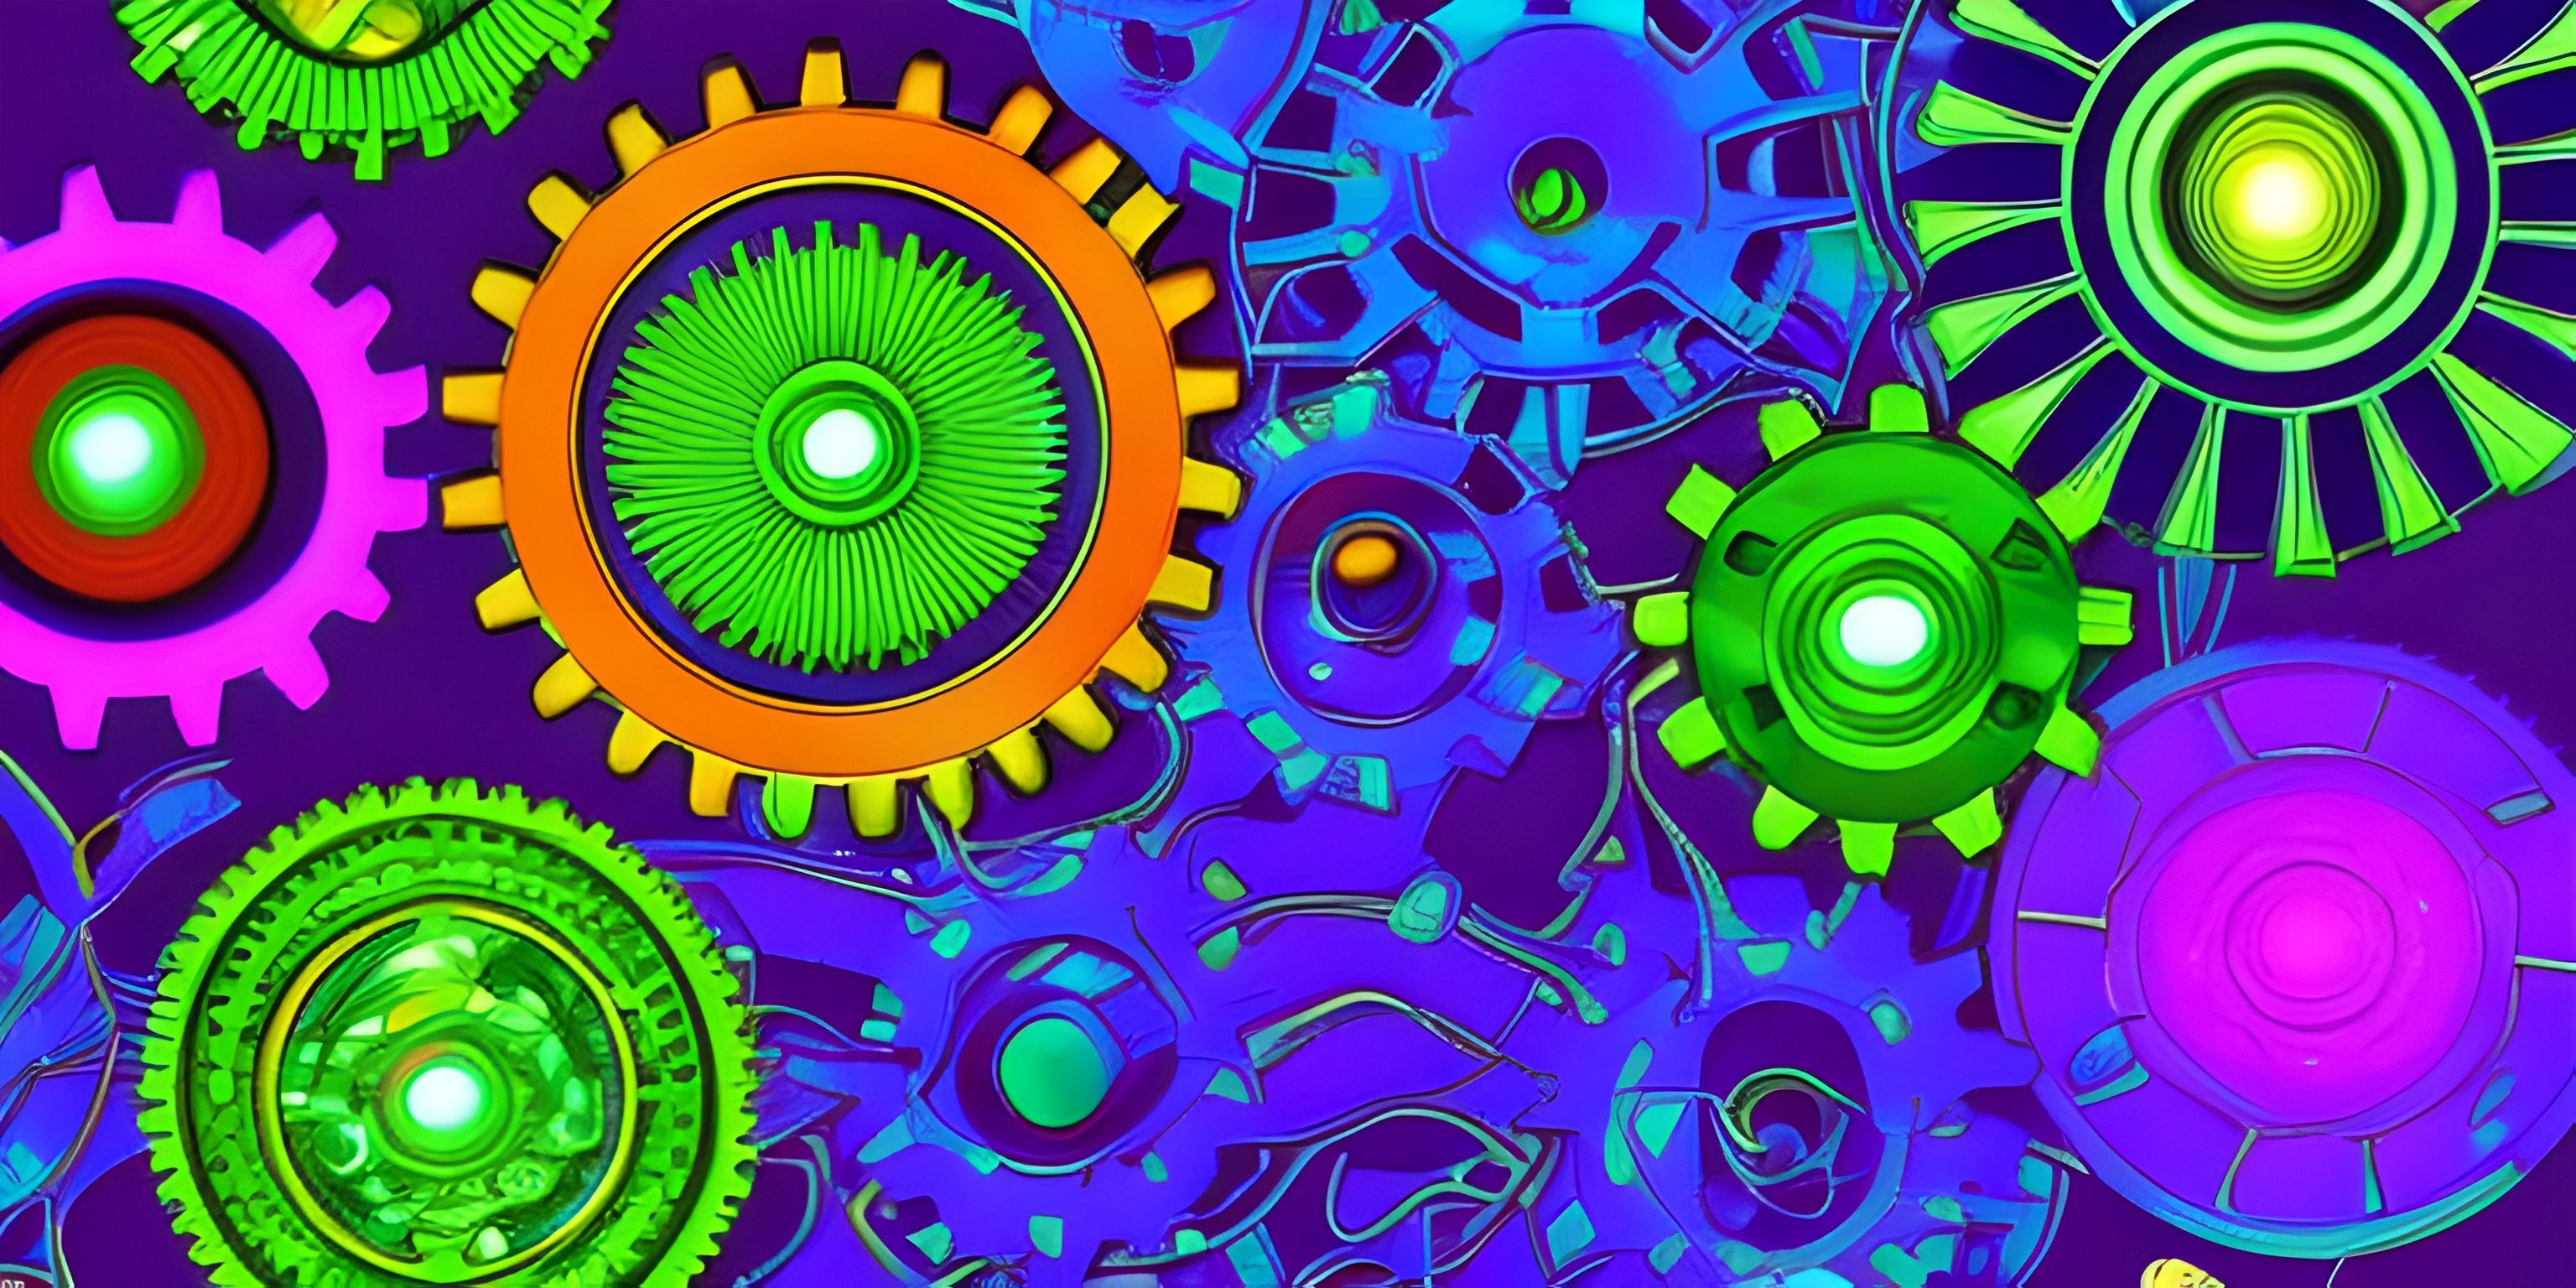 colorfully painted gears and wheels on a purple background background for a computer wallpaper